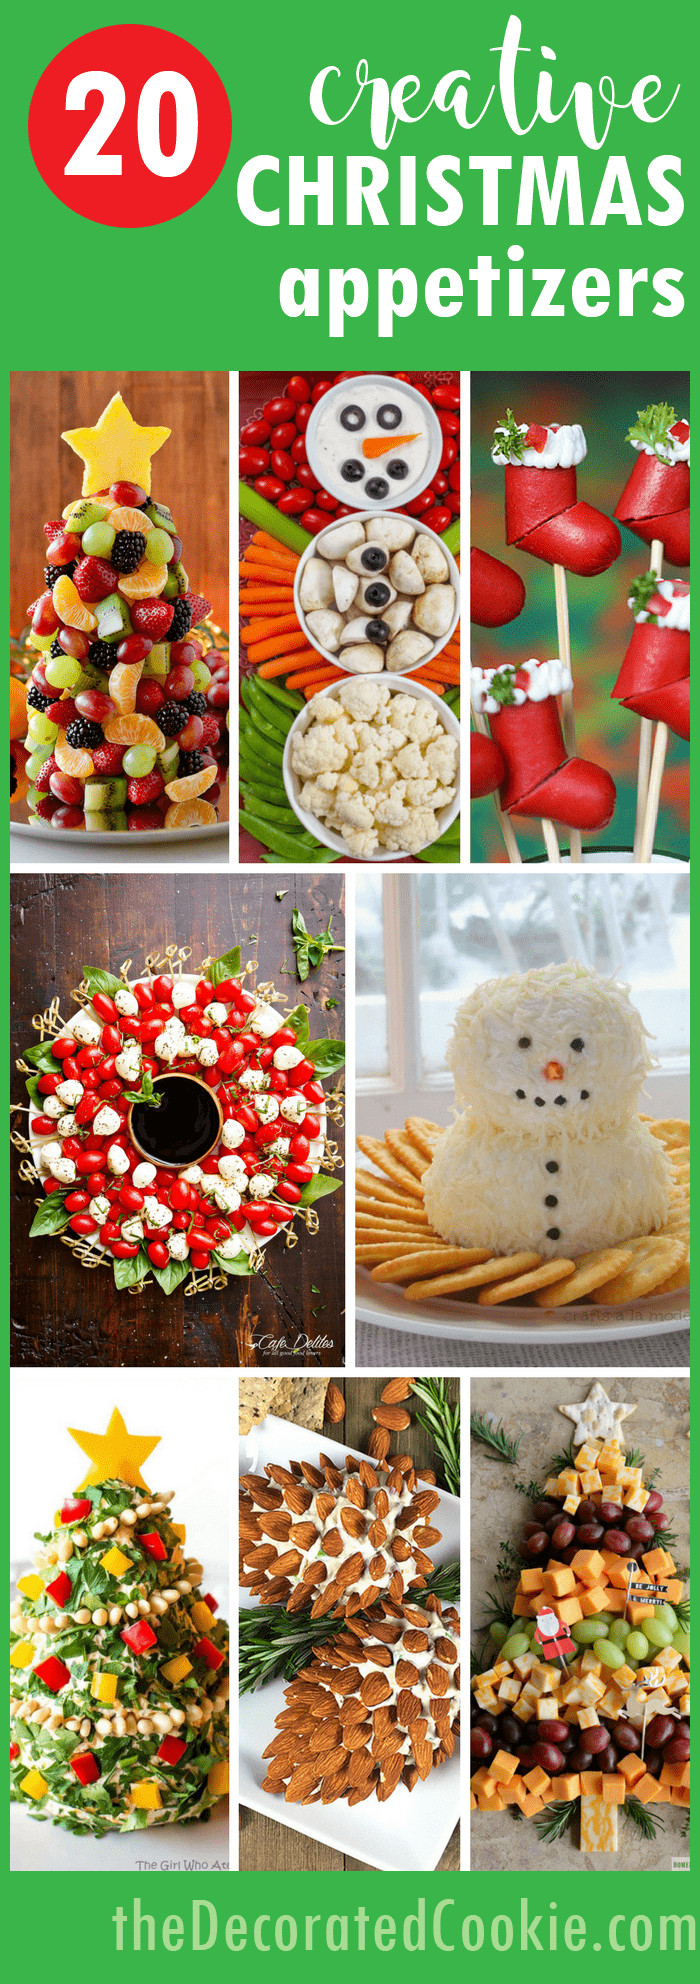 Creative Christmas Appetizers
 20 creative Christmas appetizers The Decorated Cookie